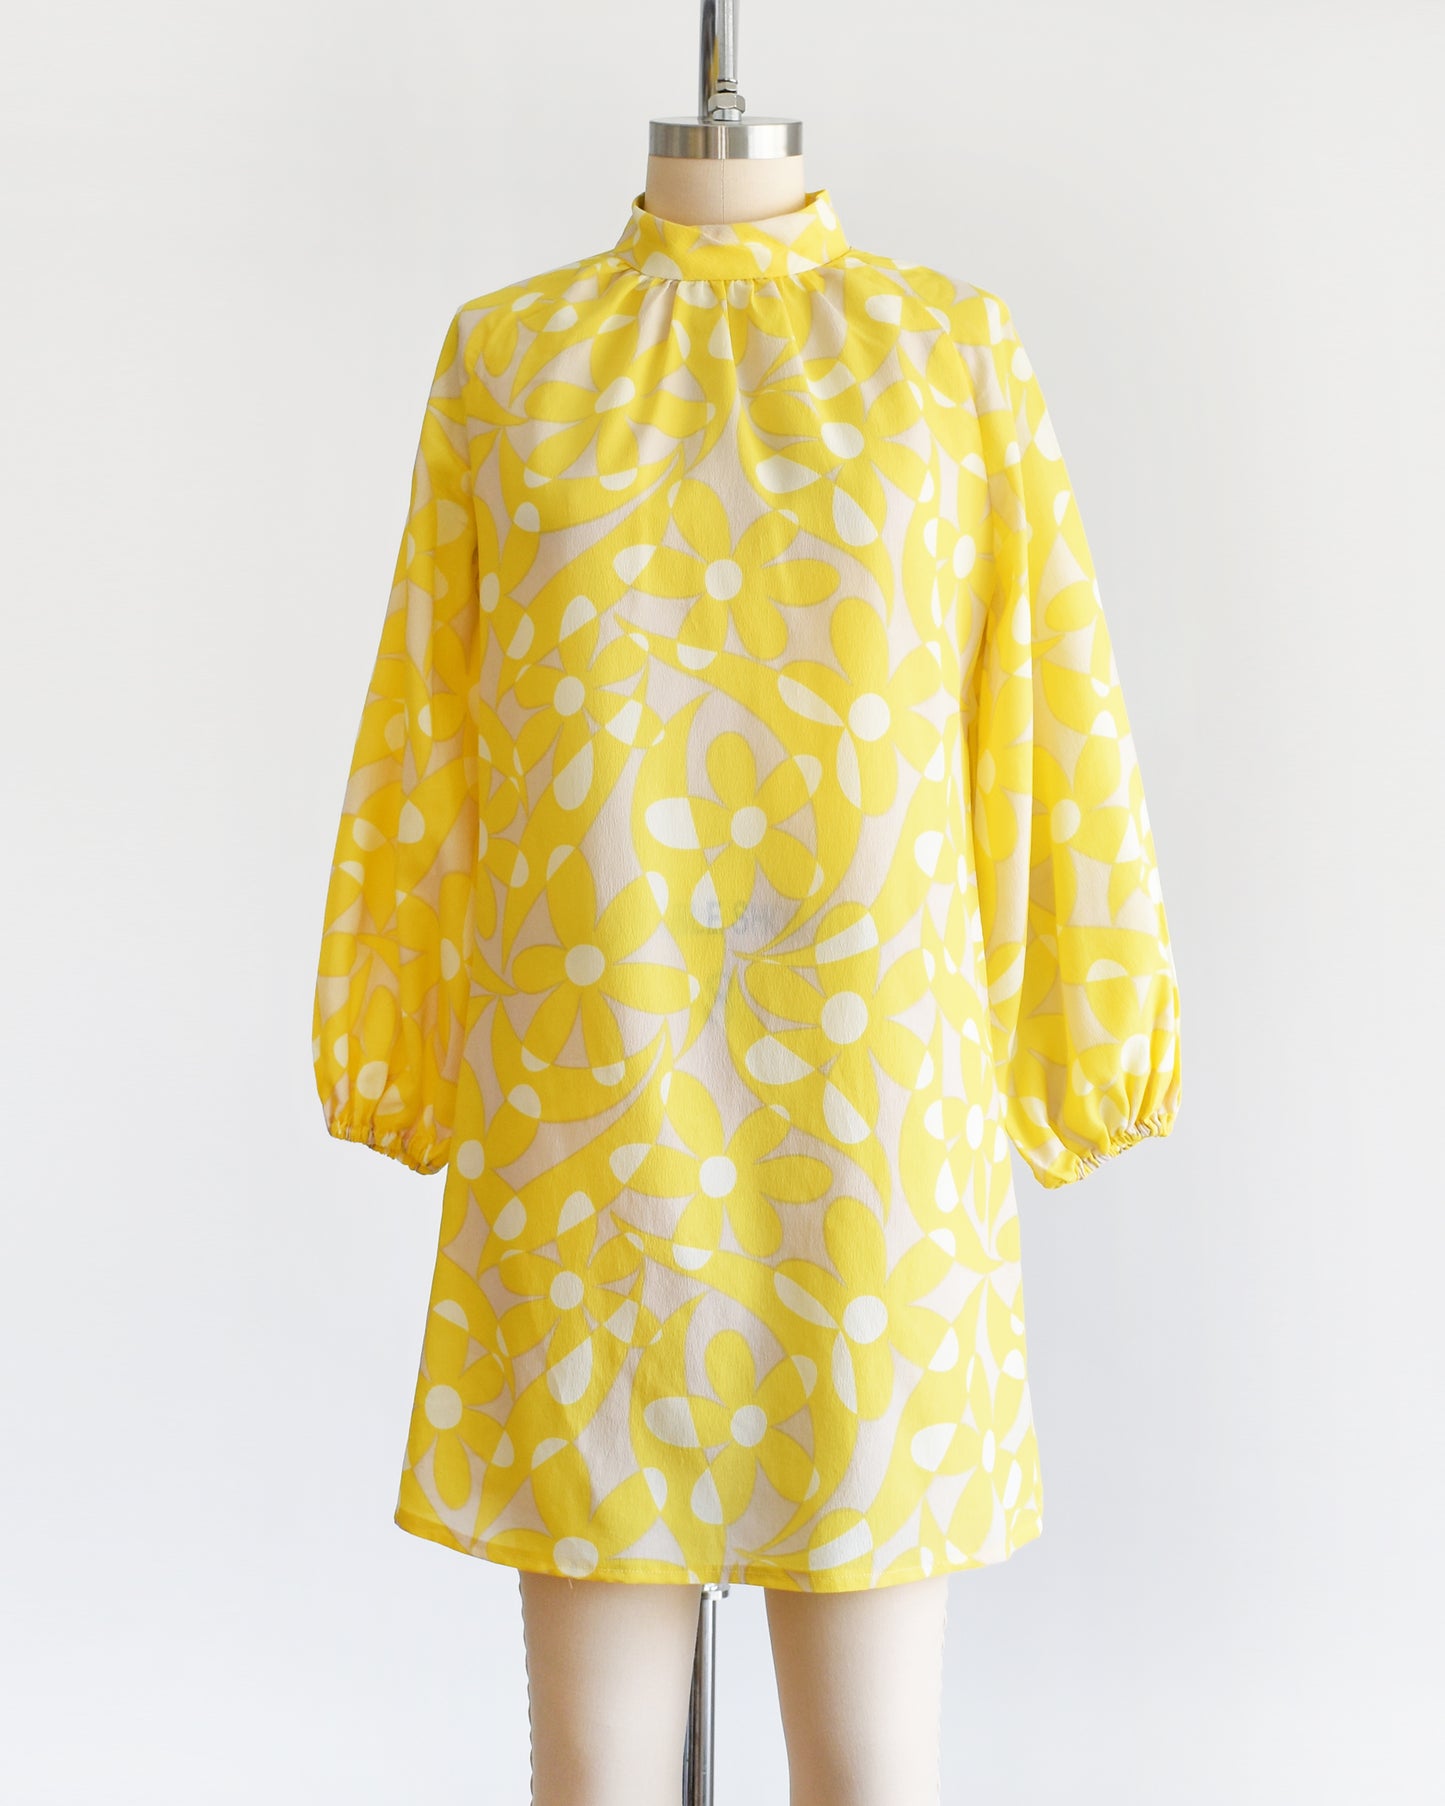 A vintage 1960s mod mini dress features a bright yellow and white floral pattern with swirls, set on a pale beige background. 